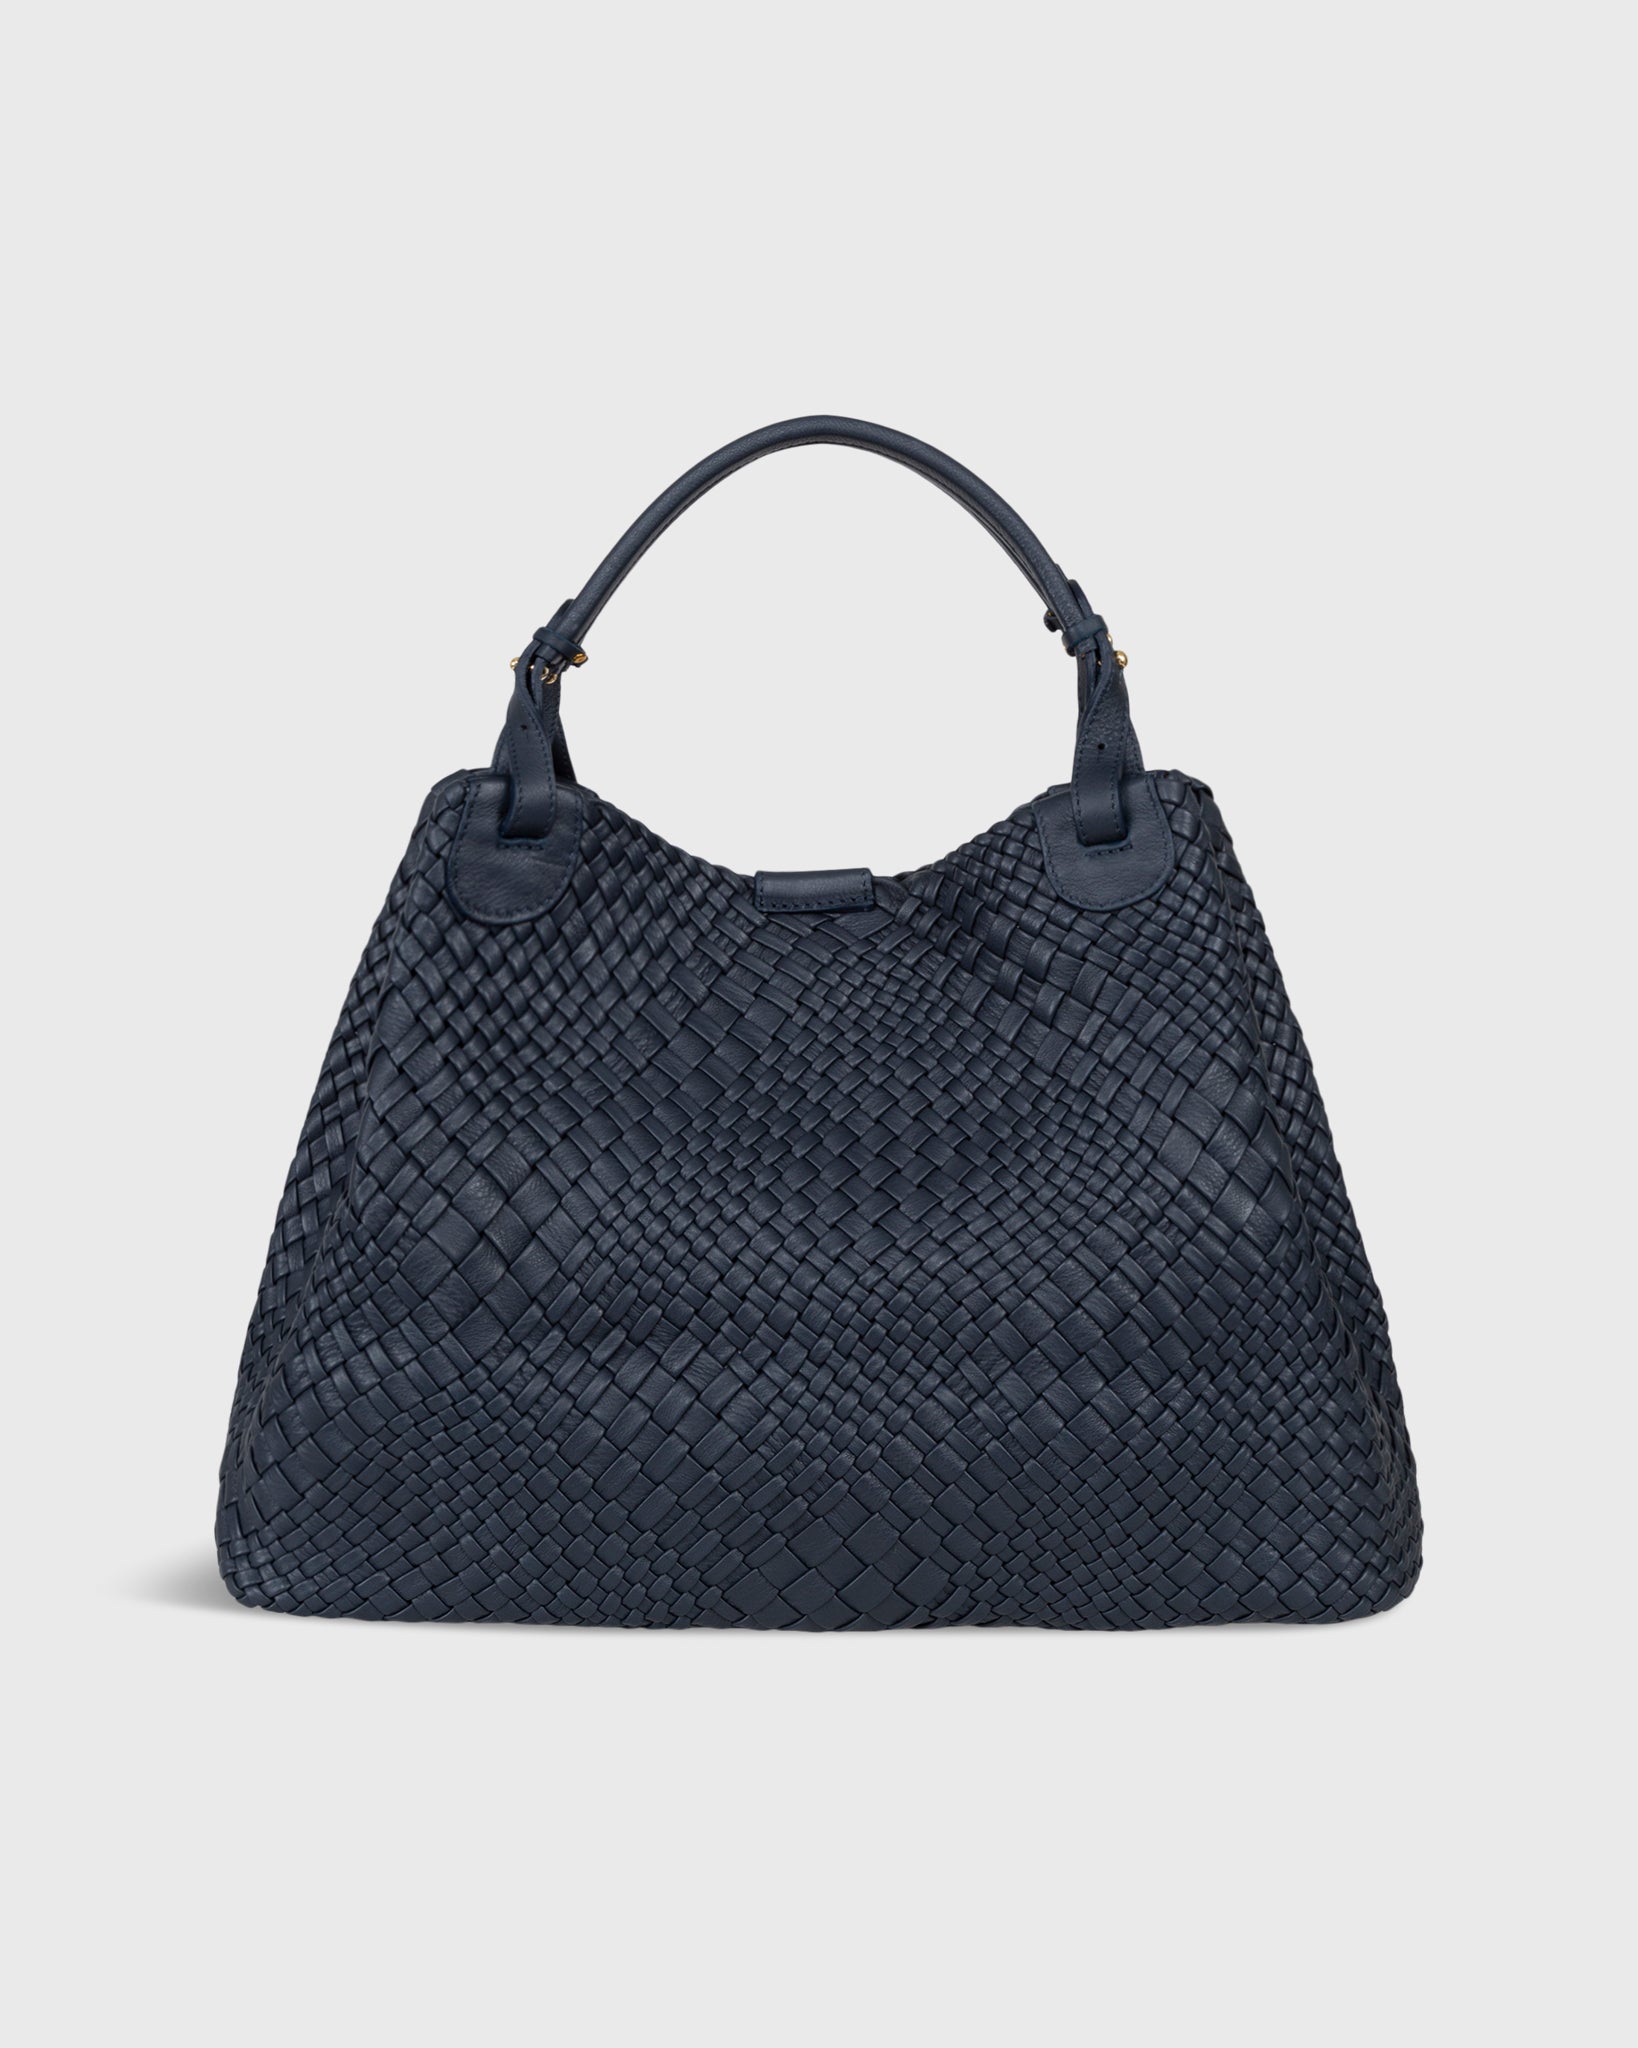 Cate Handwoven Satchel Bag in Navy Leather